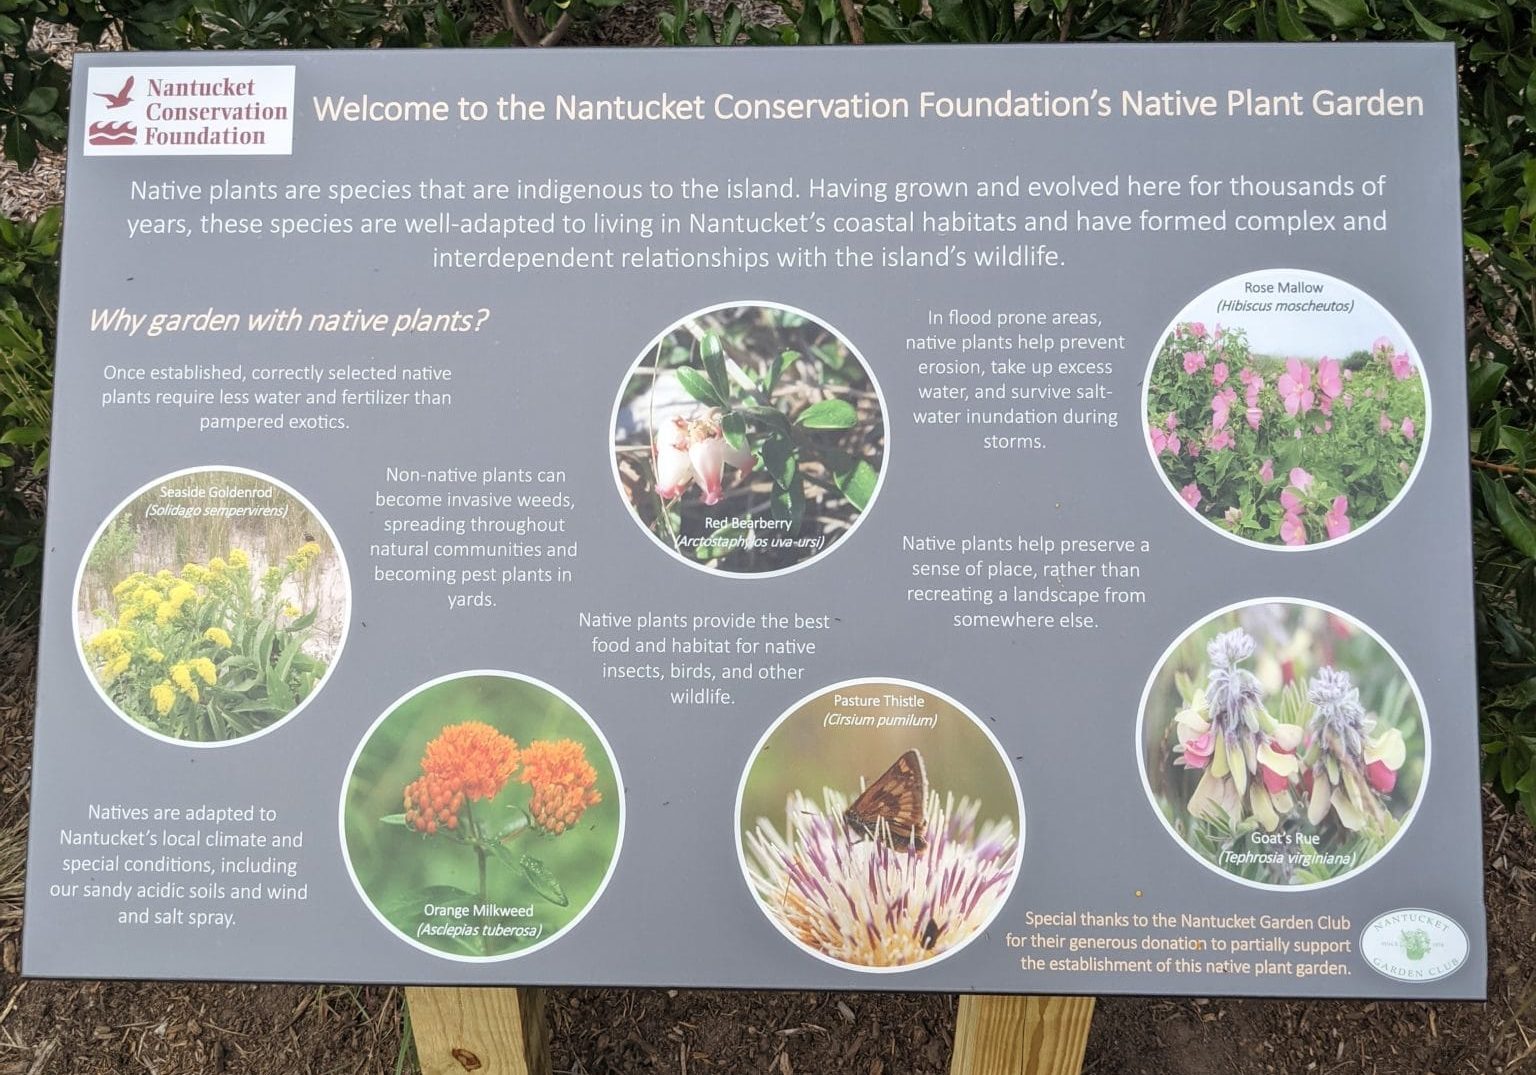 Educational signs funded in part by the Nantucket Garden Club